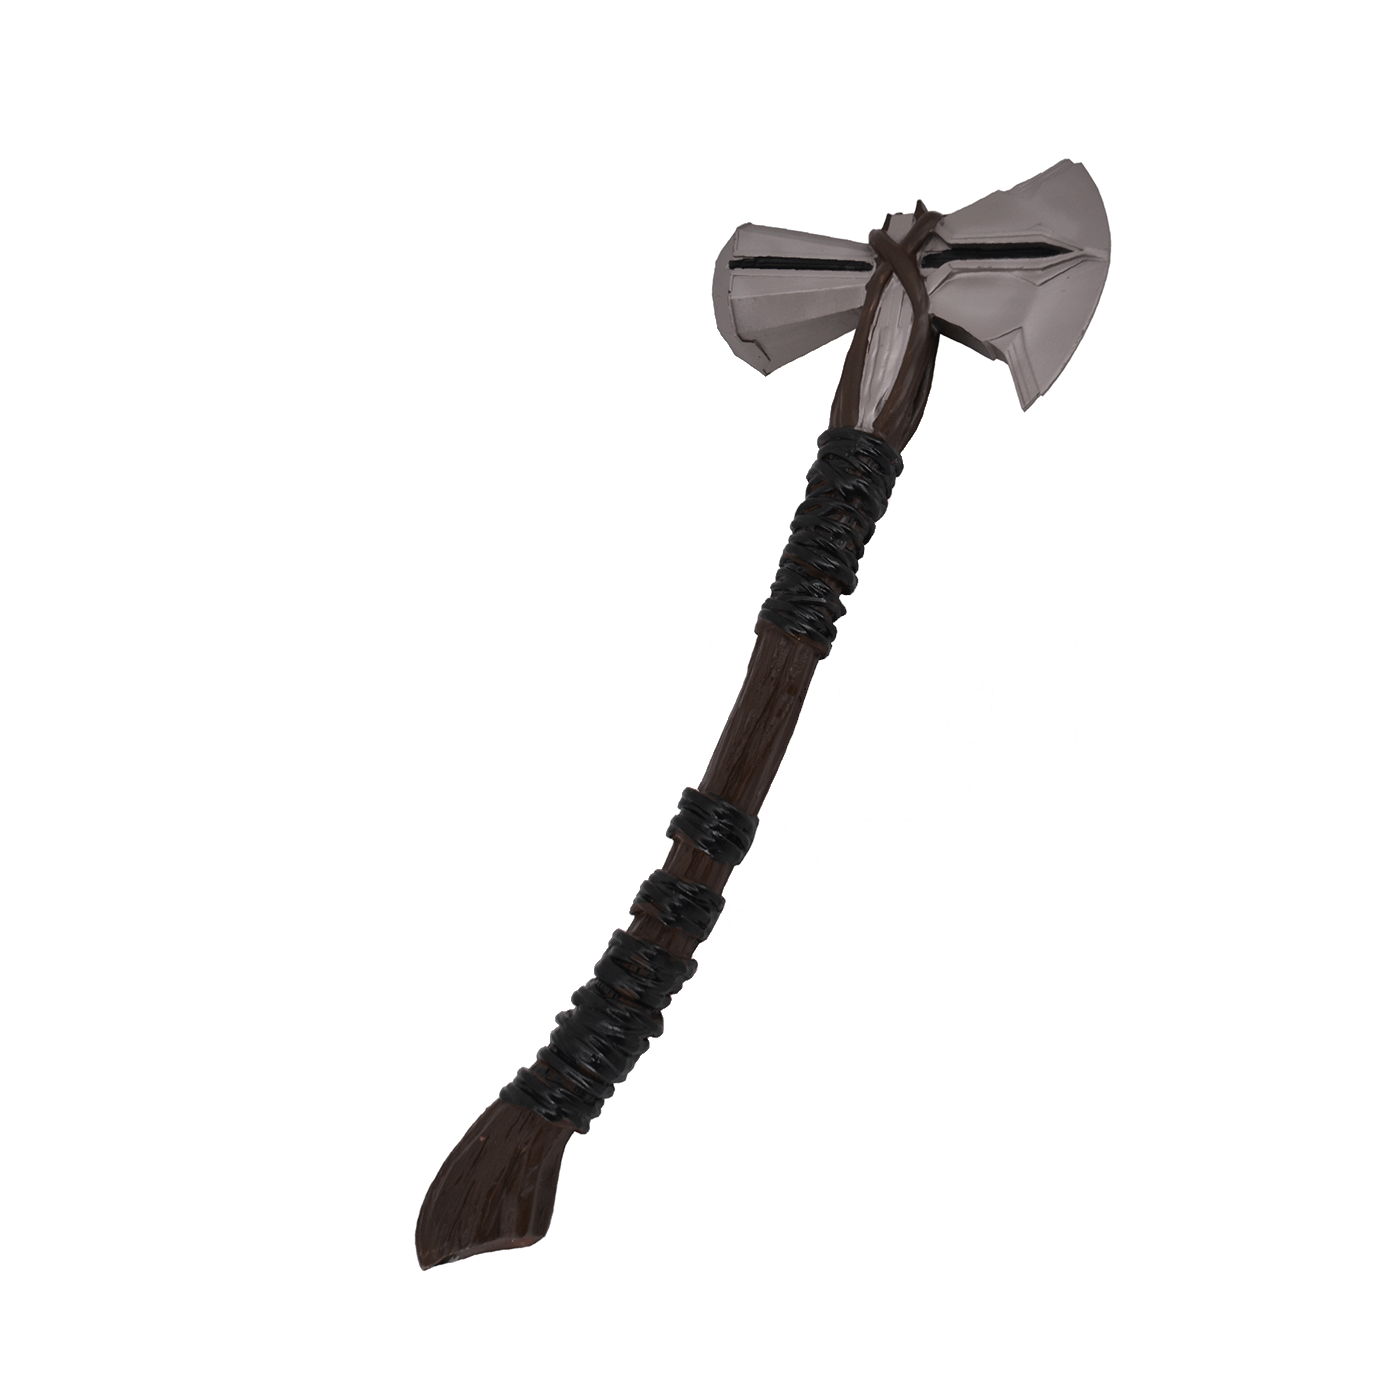 VIKING AX INSPIRED BY THE THOR MOVIE